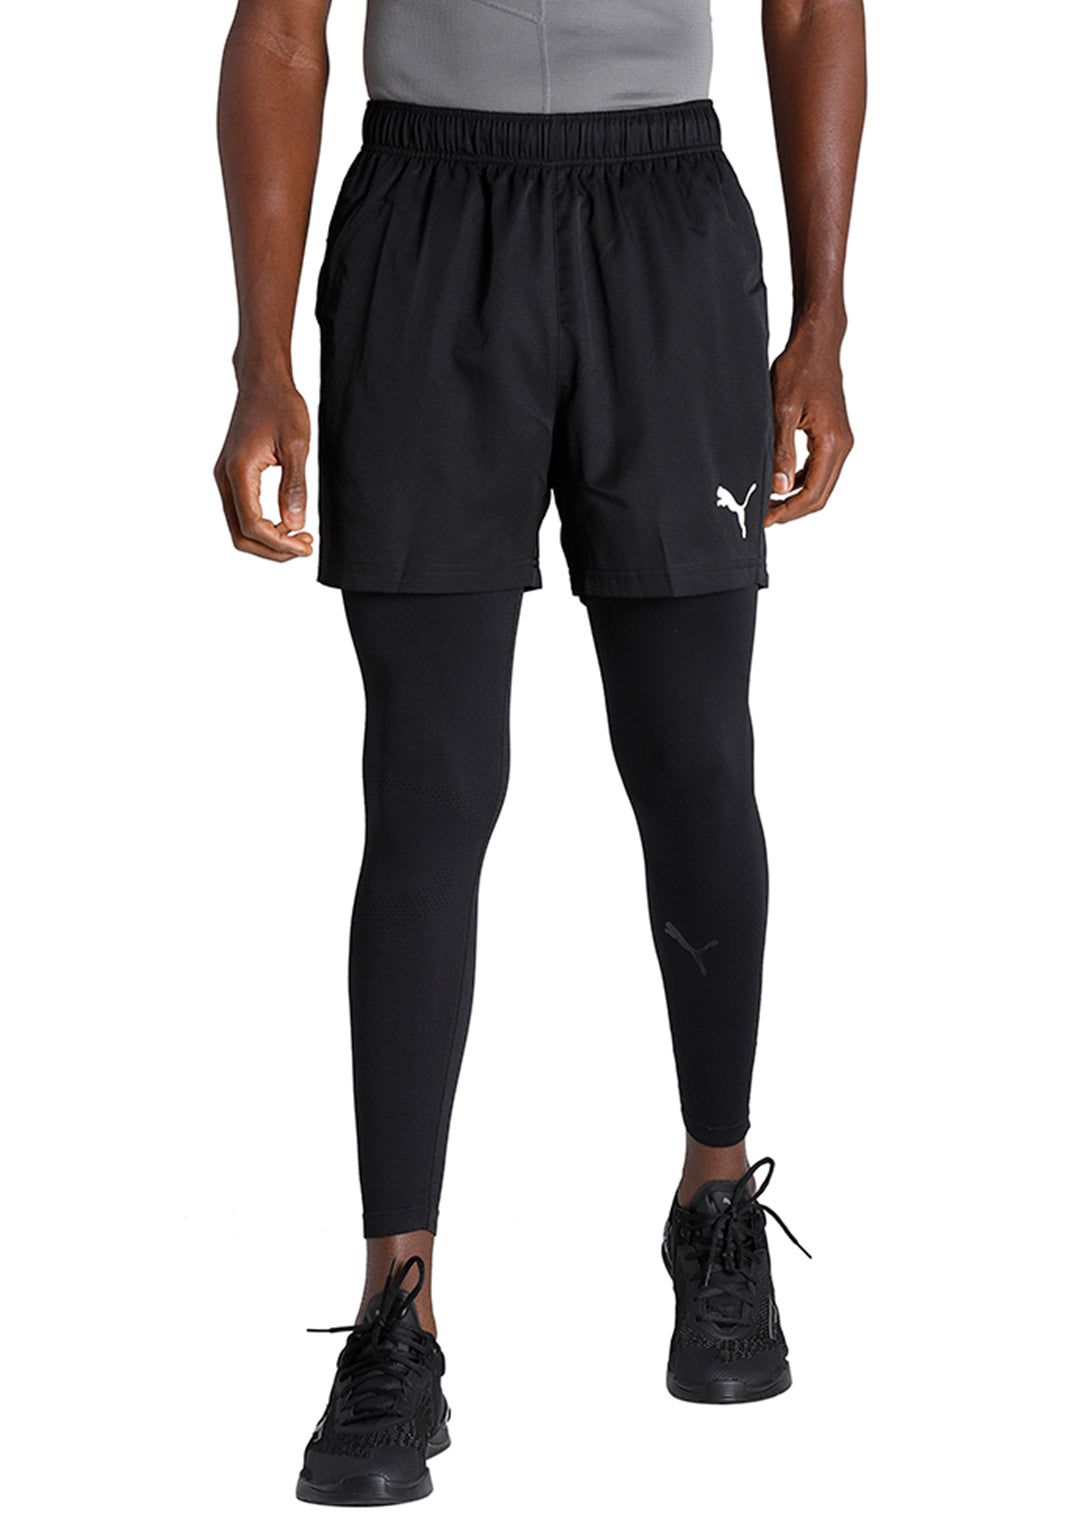 Solid Black Active Fancode Men Buy Puma Shorts From Woven